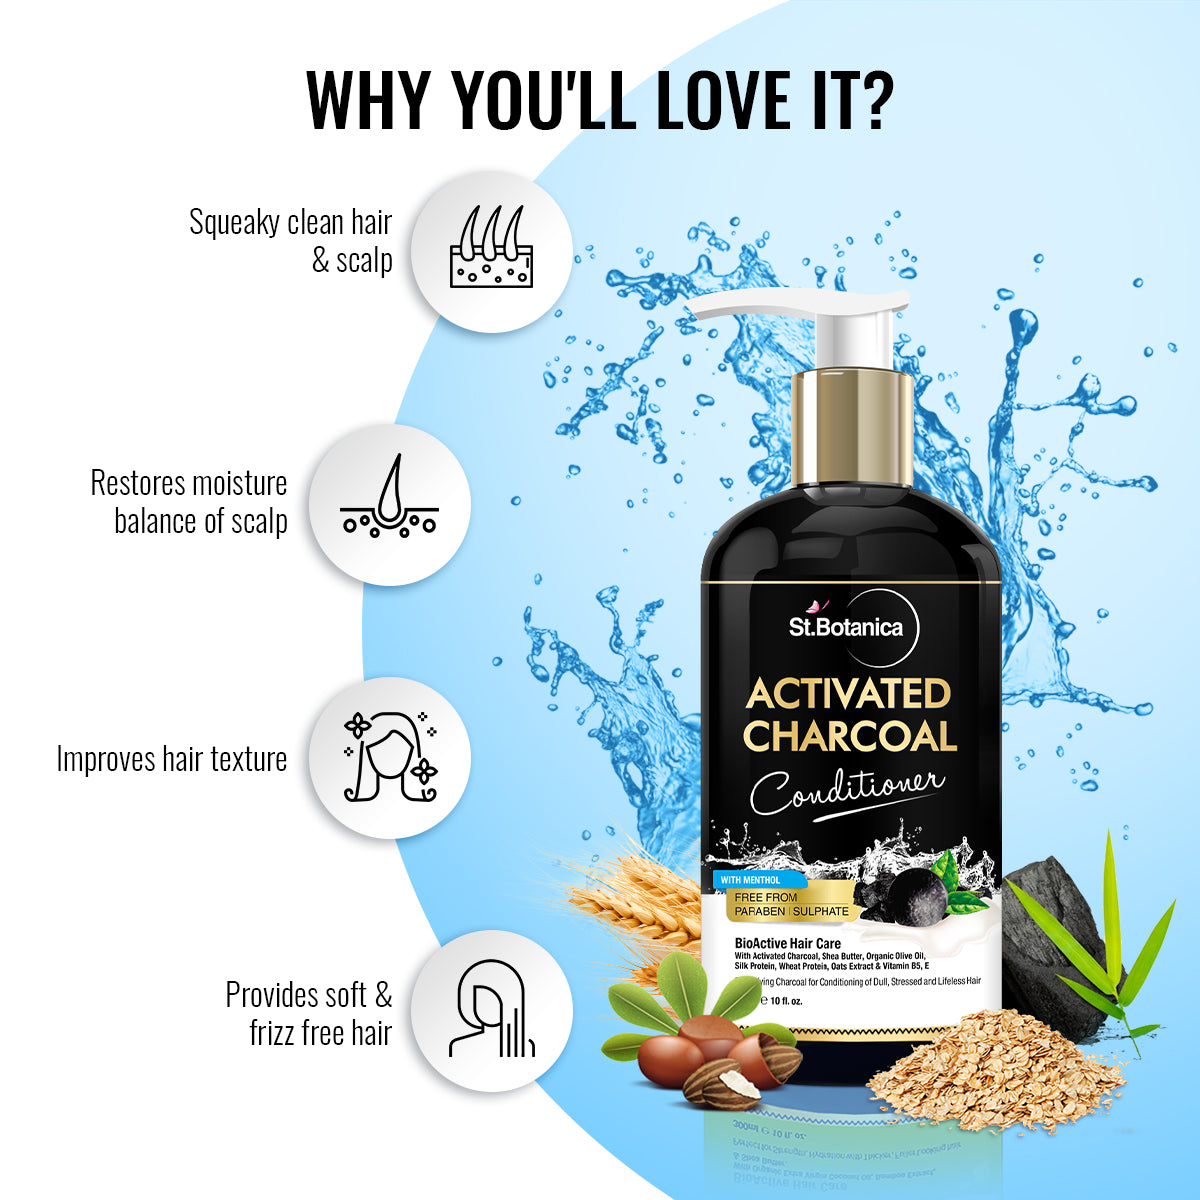 St.Botanica Activated Charcoal Hair Shampoo, No SLS/Sulphate, Paraben or Silicon - Refreshing Menthol, Organic Olive & Almond Oil, Vitamin B5, E, Oats & Silk Protein, 300 ml